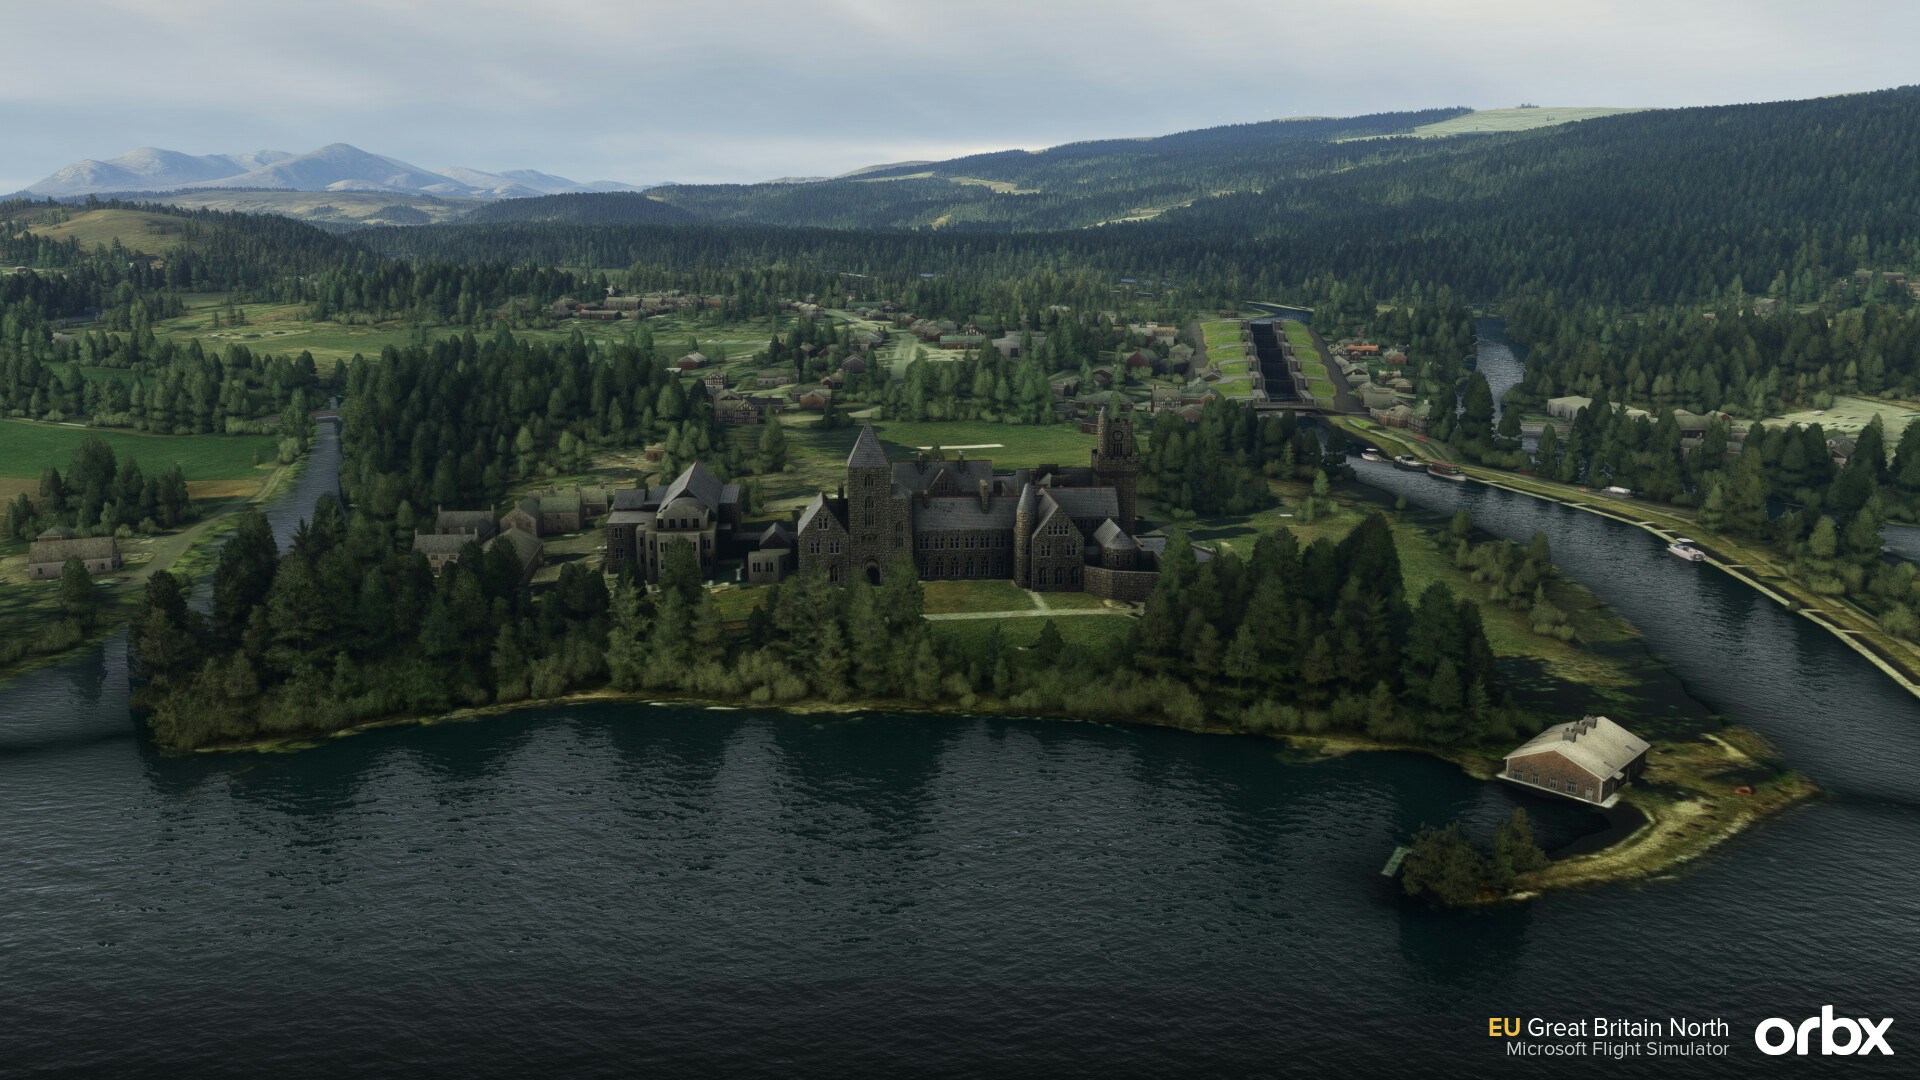 EU Great Britain North by Orbx is Now Available for MSFS